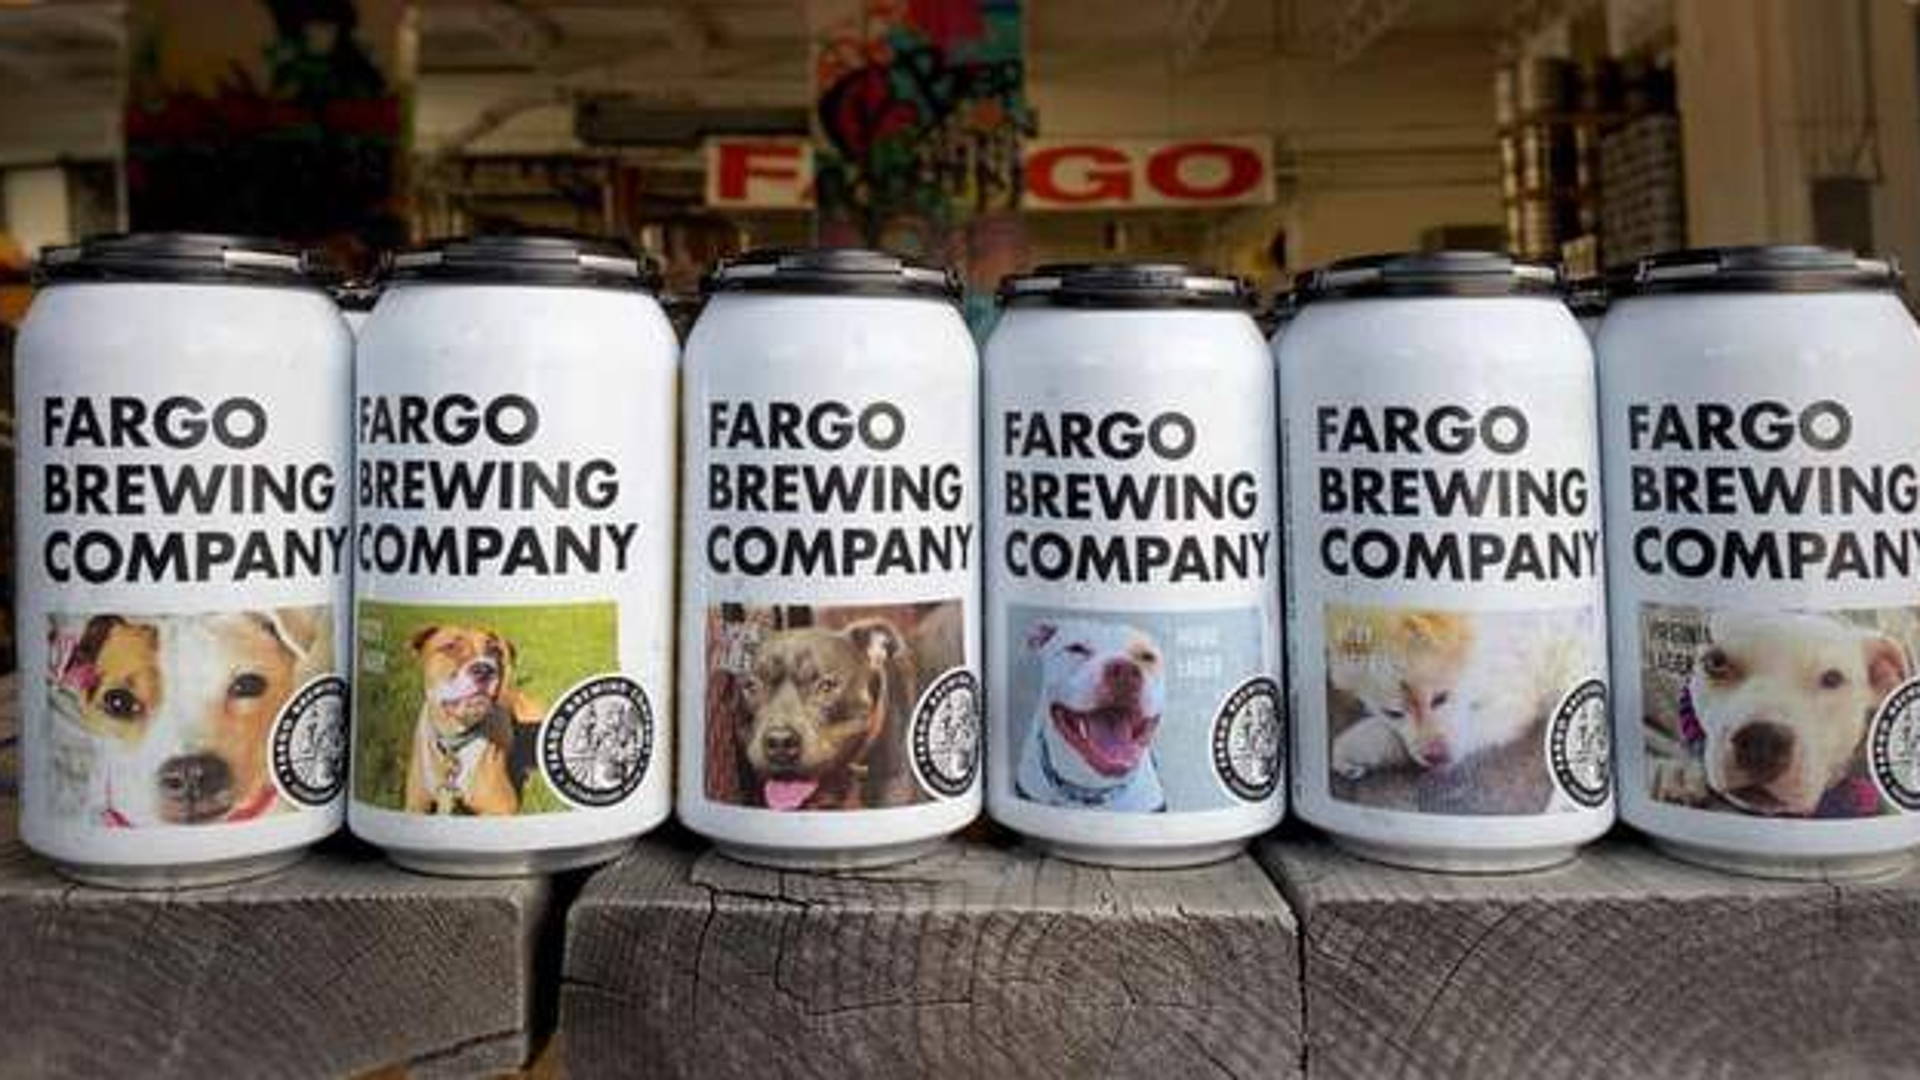 Featured image for Fargo Brewing Highlights Hard-To-Adopt Dogs On Beer Labels